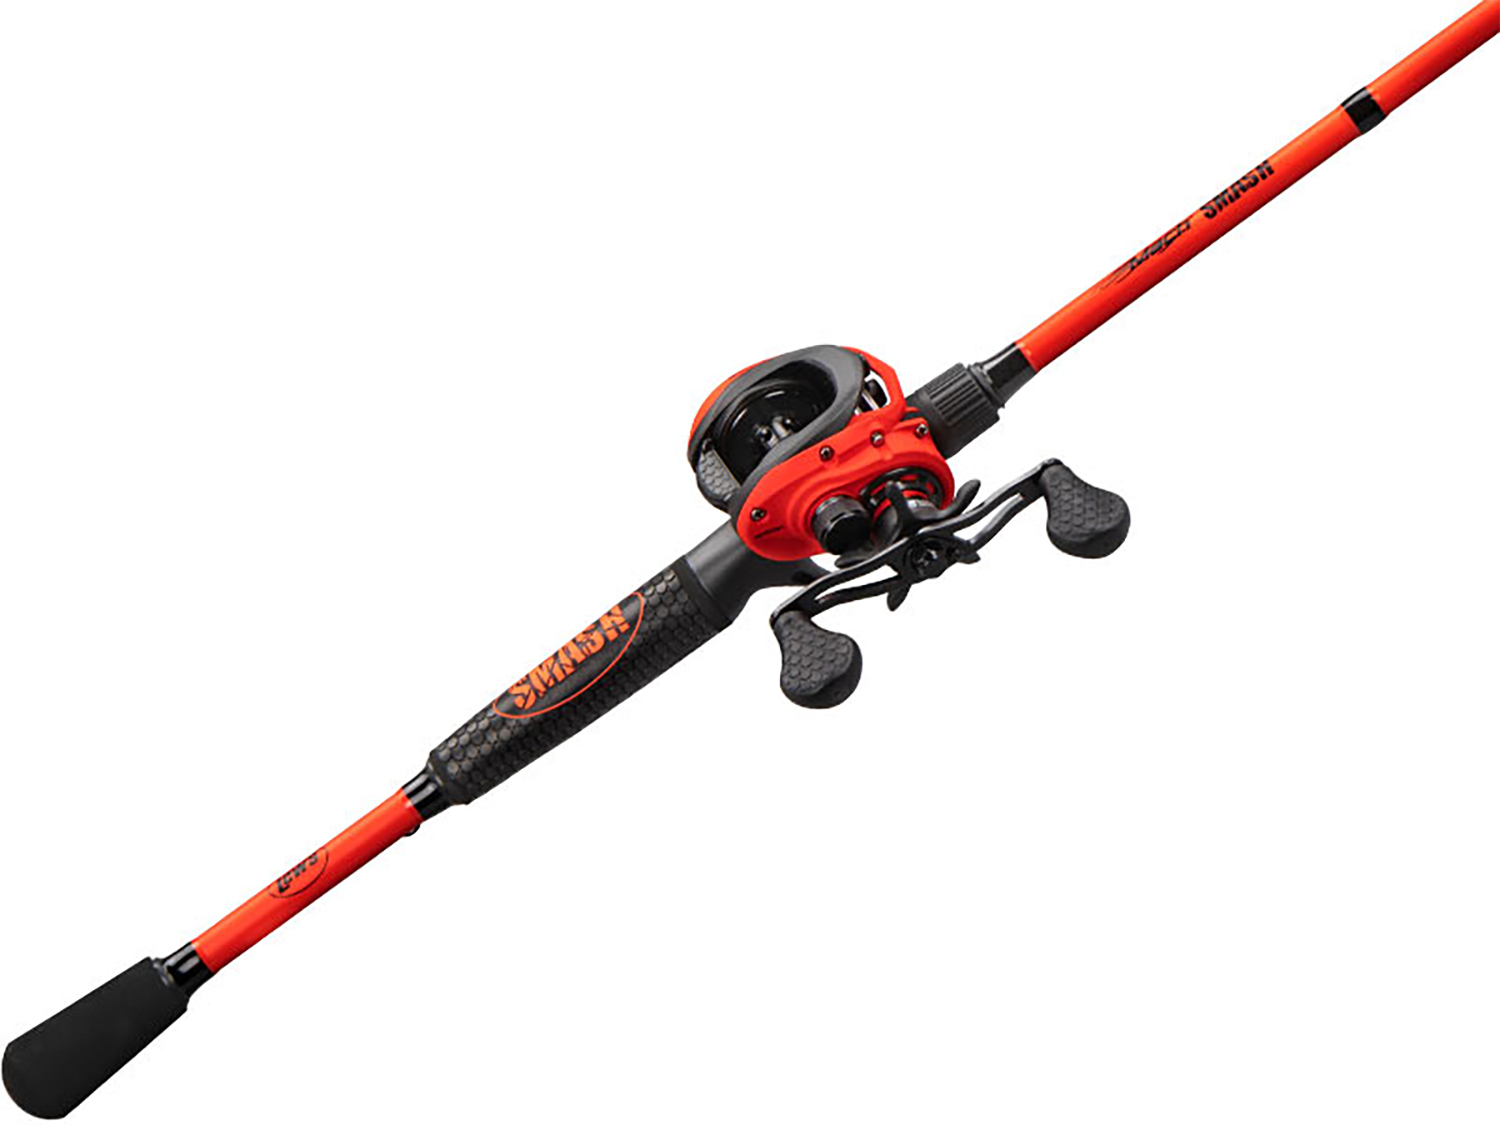 Lew's Mach Smash Spinning Reel Combo Review! 